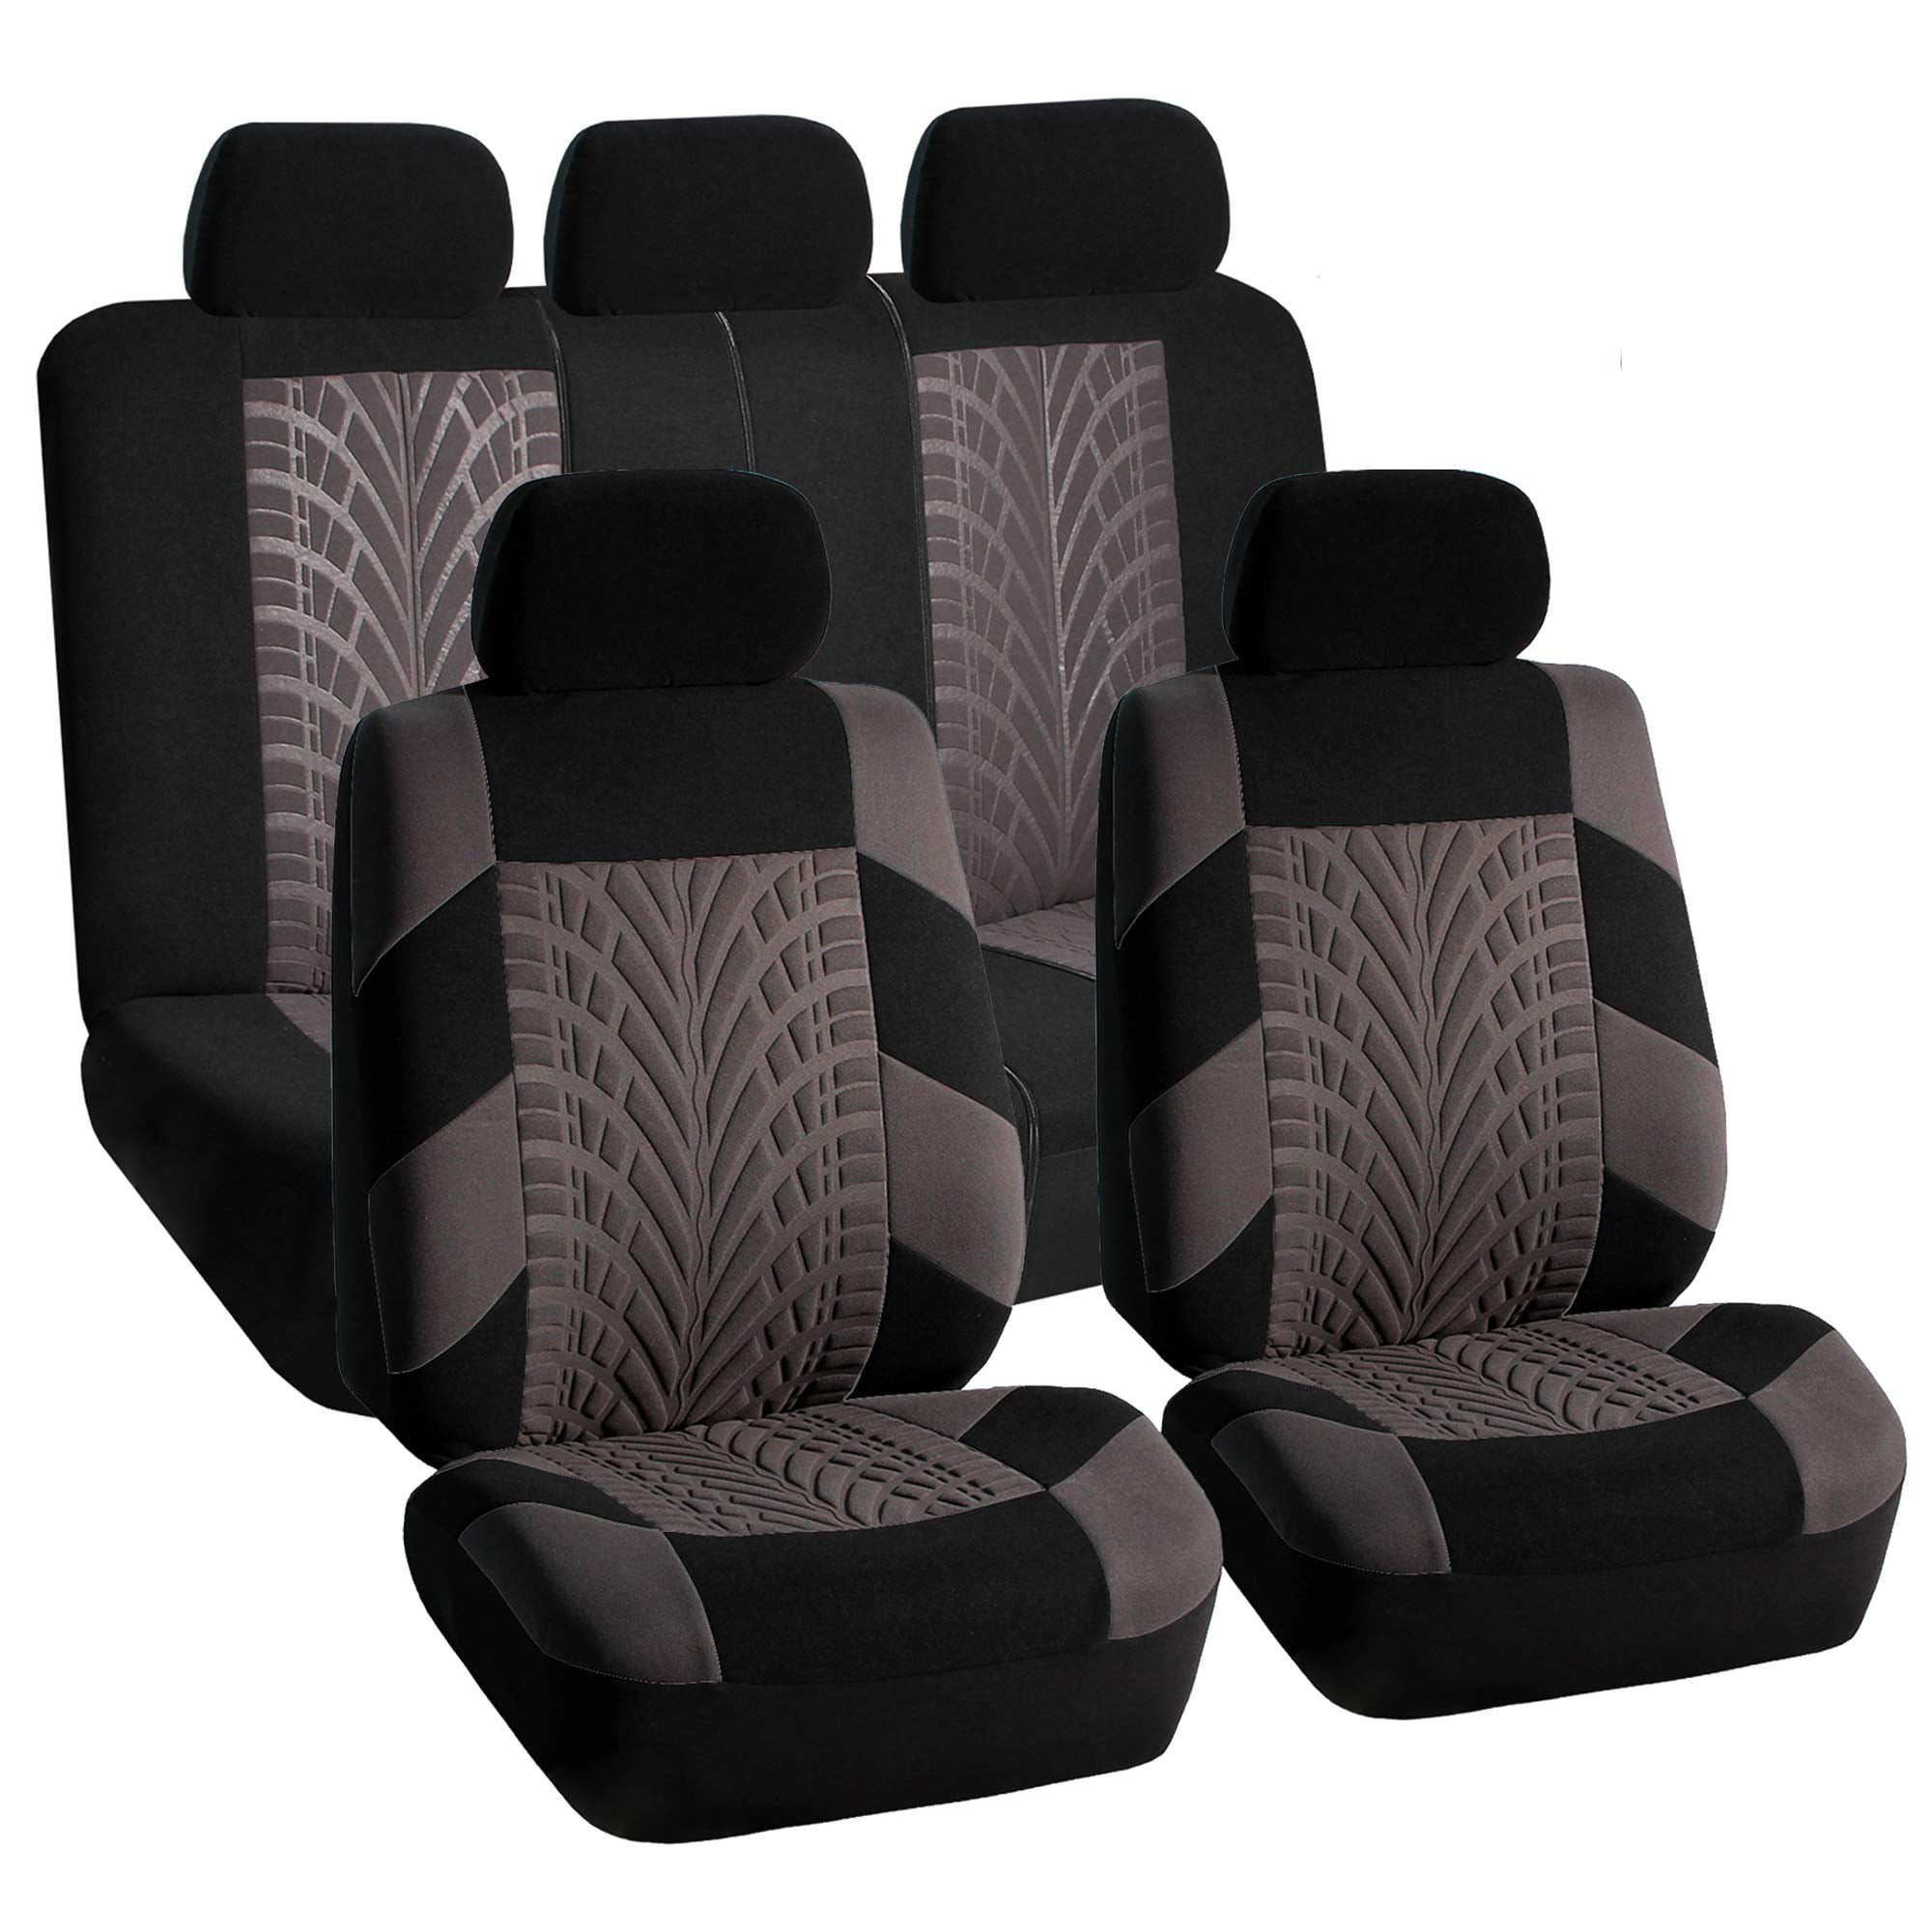 2UNE-4 Universal Car Seat Covers Set 